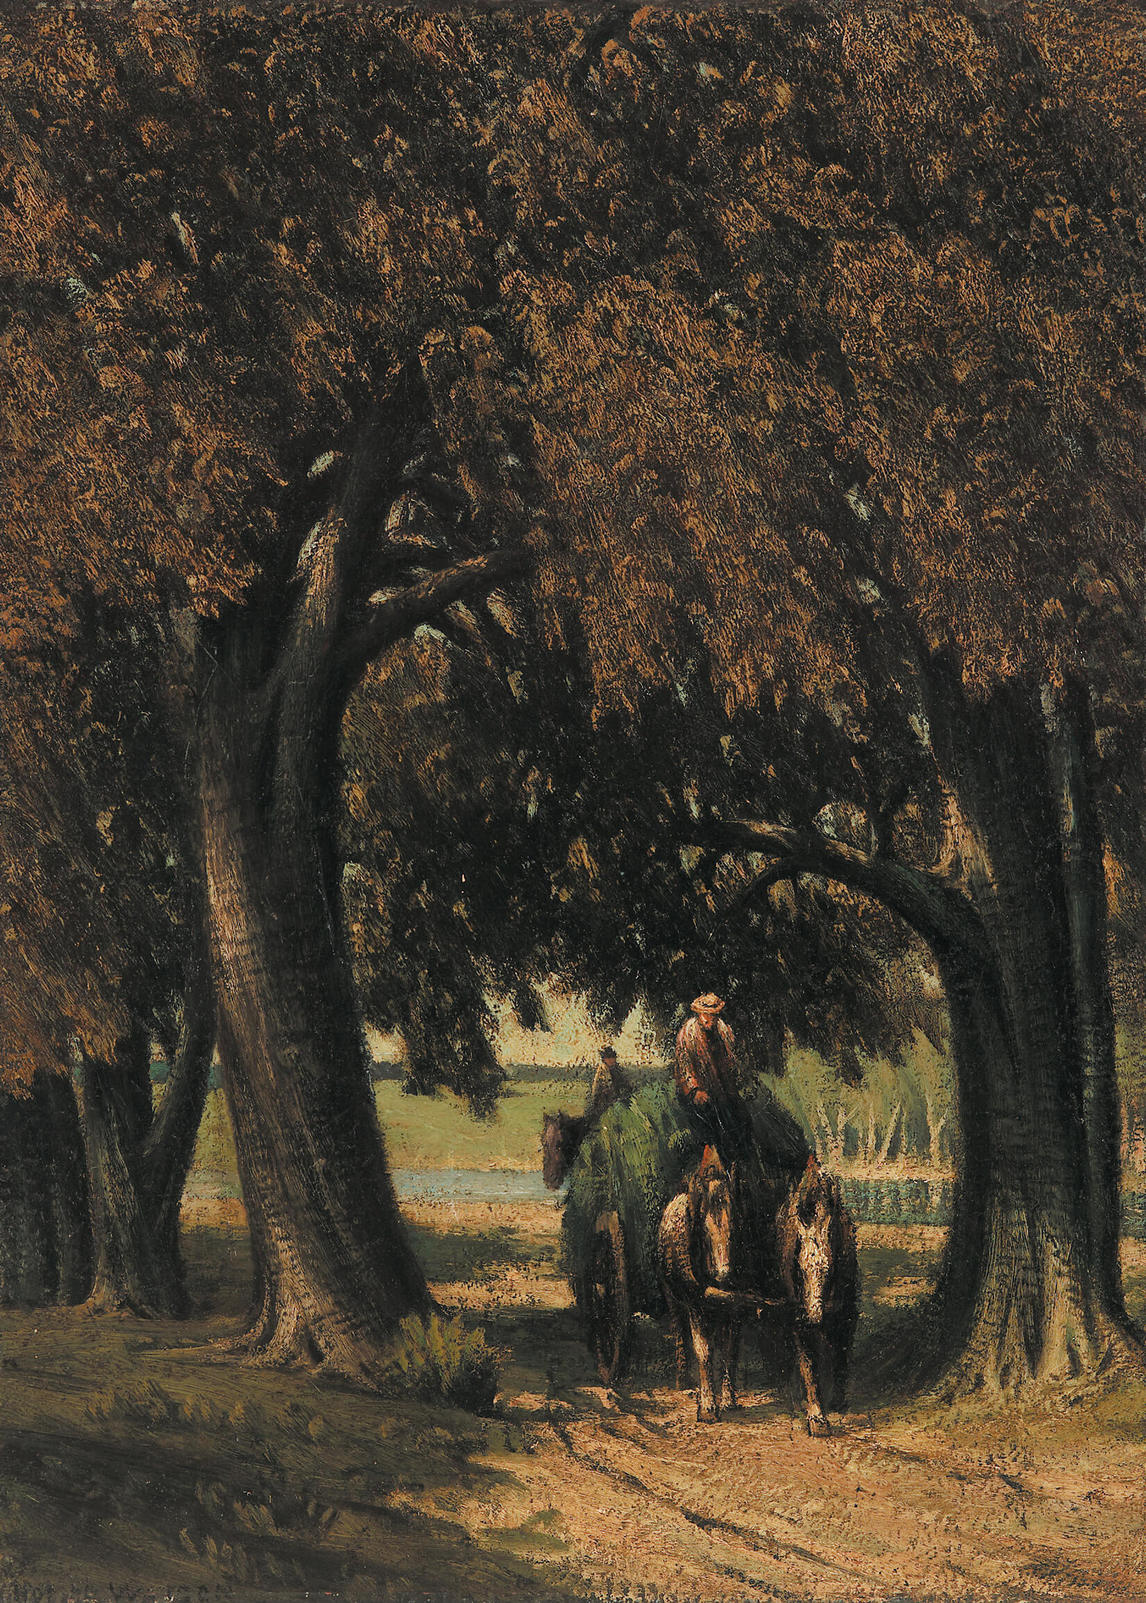 The Load of Grass, 1898, by Homer Watson